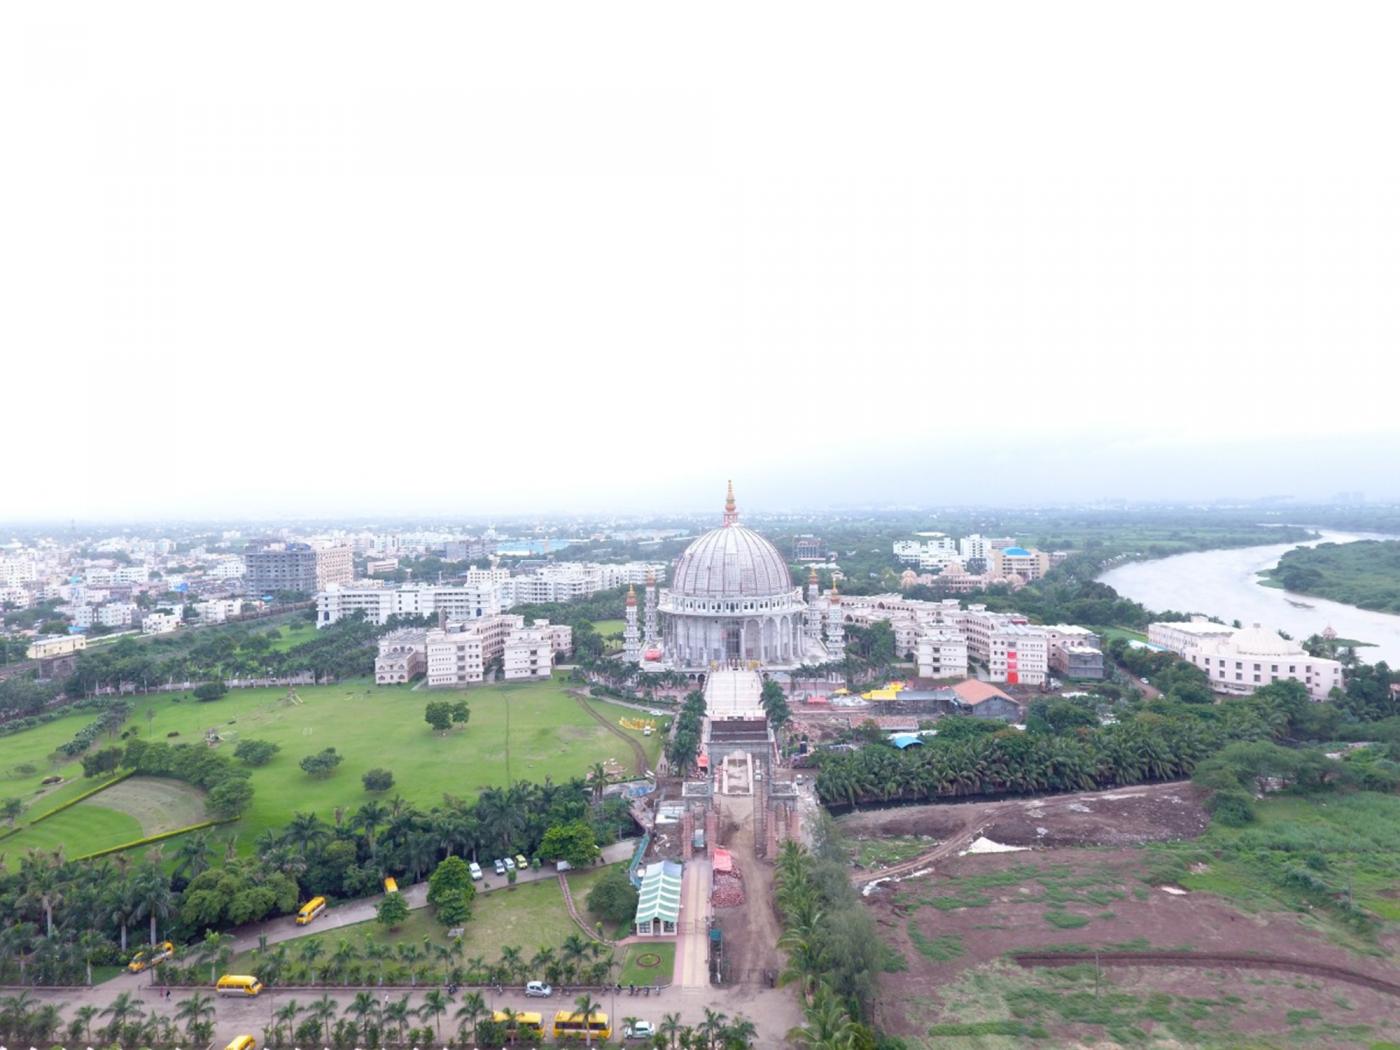 The planet's biggest pillar-less dome, built without a professional architect's design, housing 54 massive bronze statues of some of the greatest leaders of humanity in Pune. The World Peace Monument dome has a diameter of 160 feet, compared with the Vatican Dome's 139.6 feet, and stands 263 feet tall with a bell hanging from the centre, and the prayer hall is of around 30,000 sq ft. by .